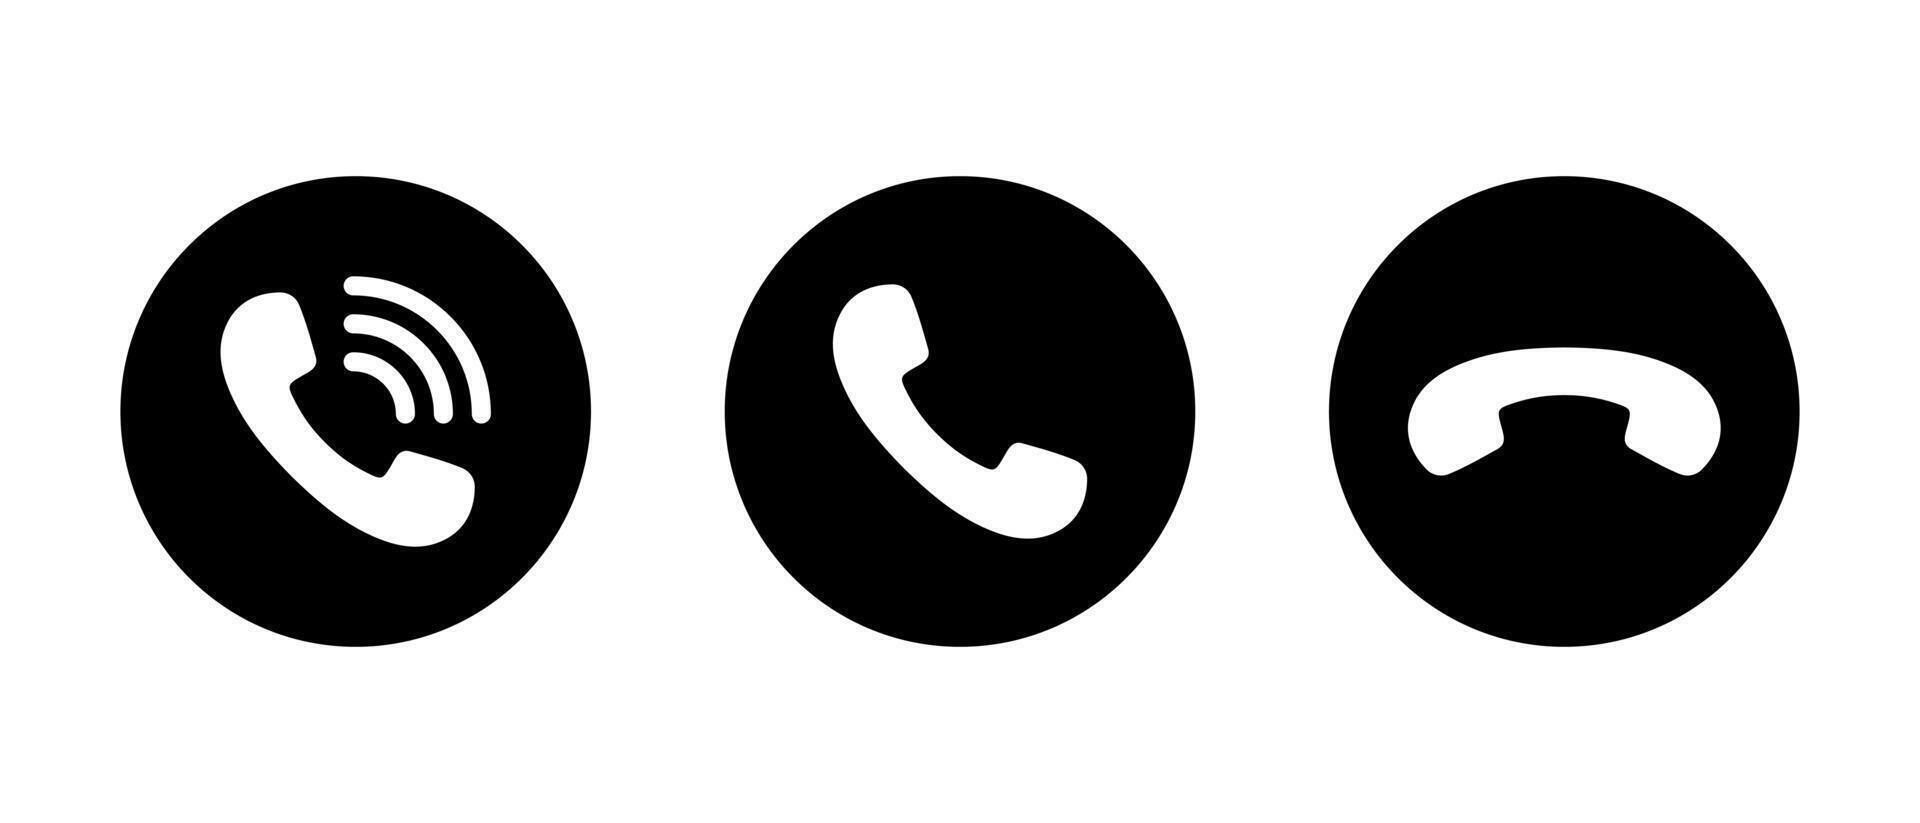 Phone, handset call icon in generic style vector